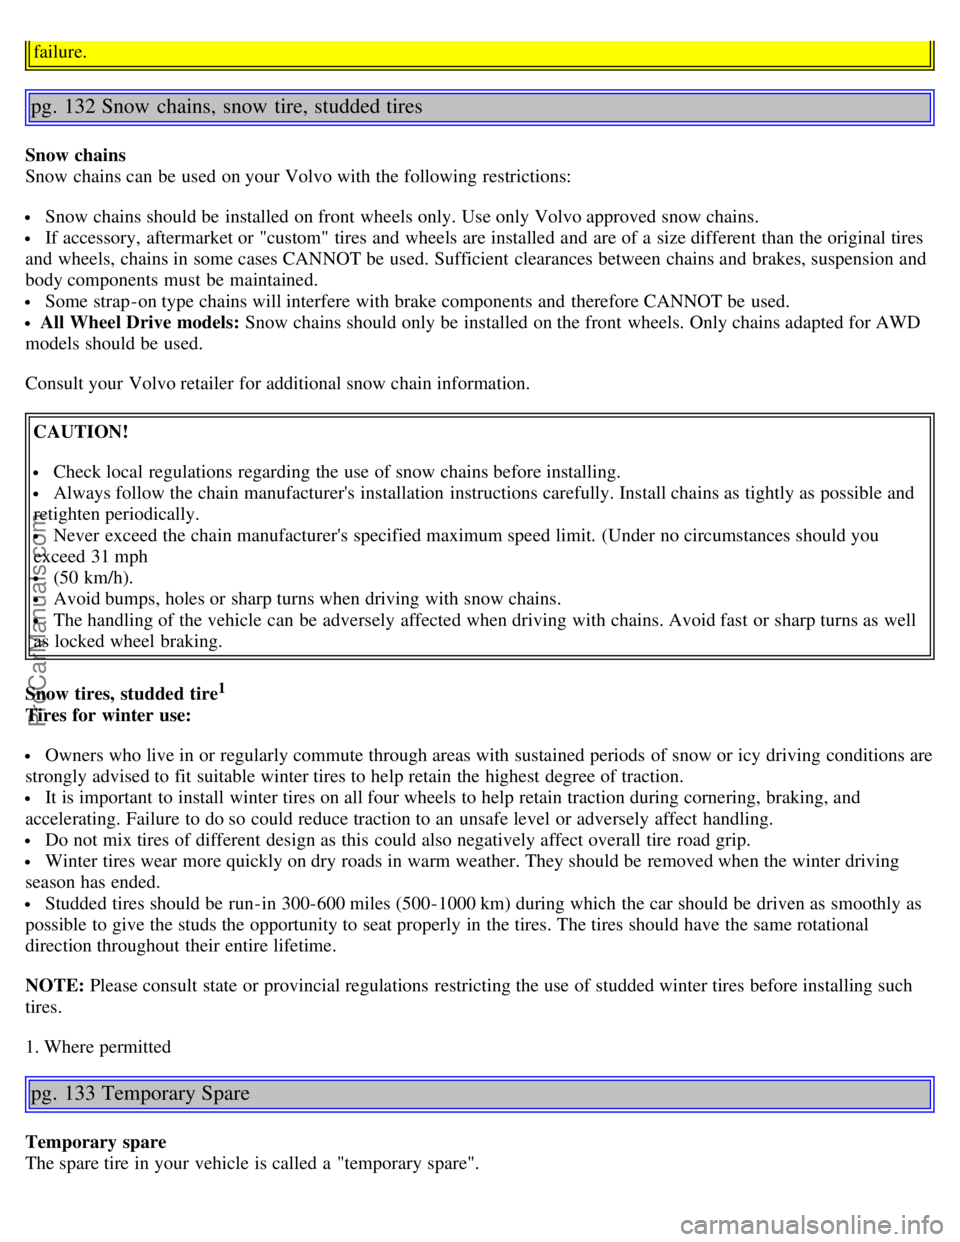 VOLVO S40 2005  Owners Manual failure.
pg. 132 Snow  chains, snow  tire, studded tires
Snow chains
Snow chains can be  used on your Volvo with the following restrictions:
 Snow chains should be  installed on front  wheels only. Us